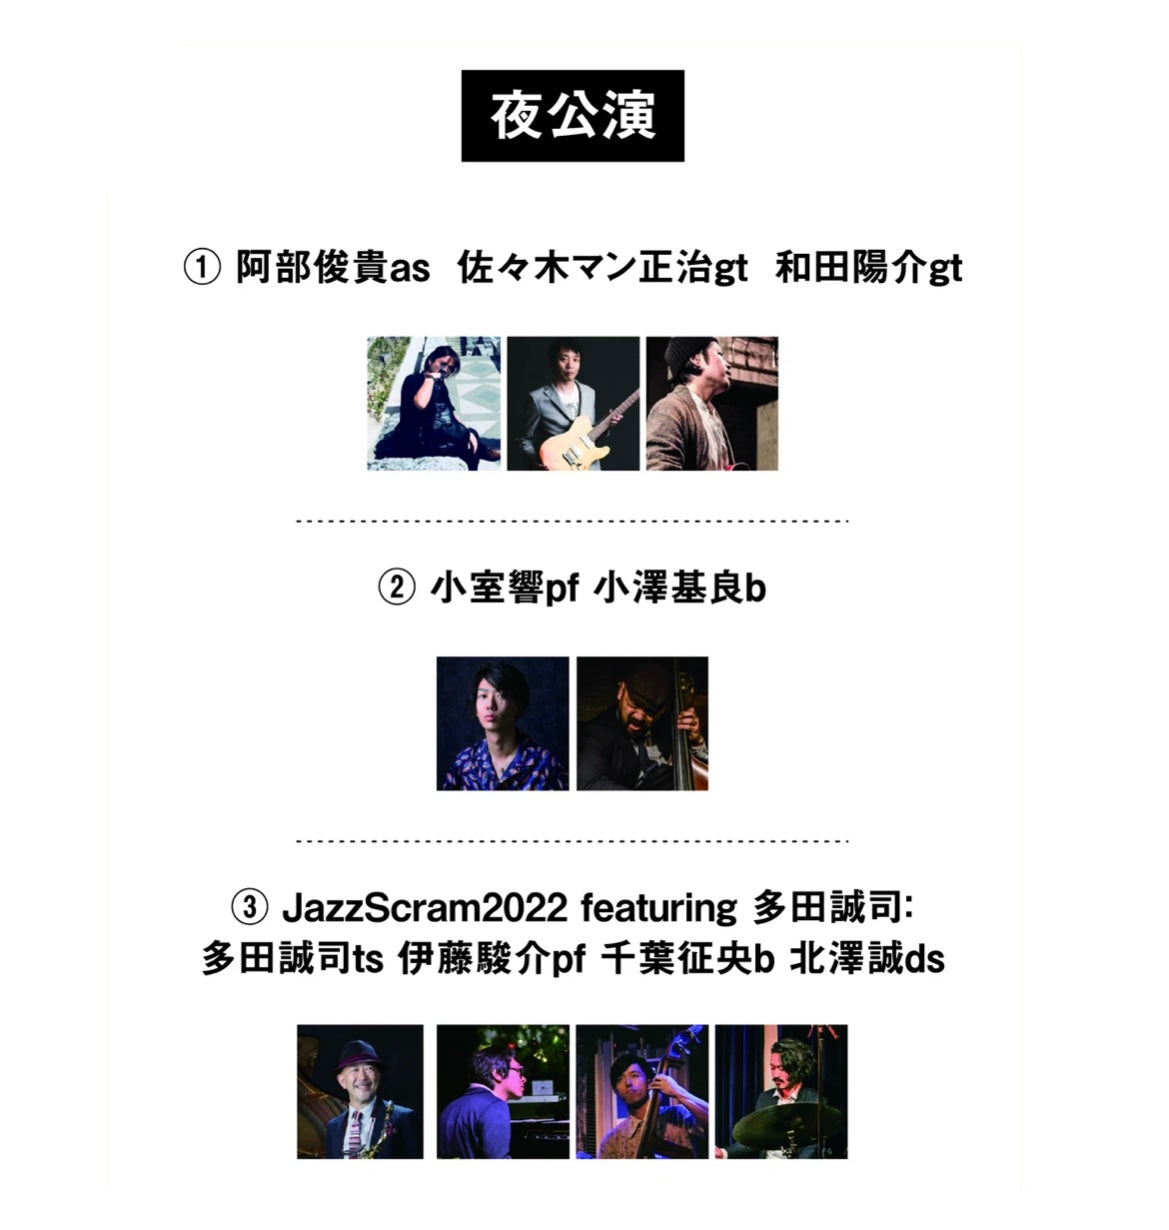 “Jazz Scrum2022”  Live movie 予約購入フォーム  11/6 sun  COMBO STAGE day1  @DOLPHY 夜公演